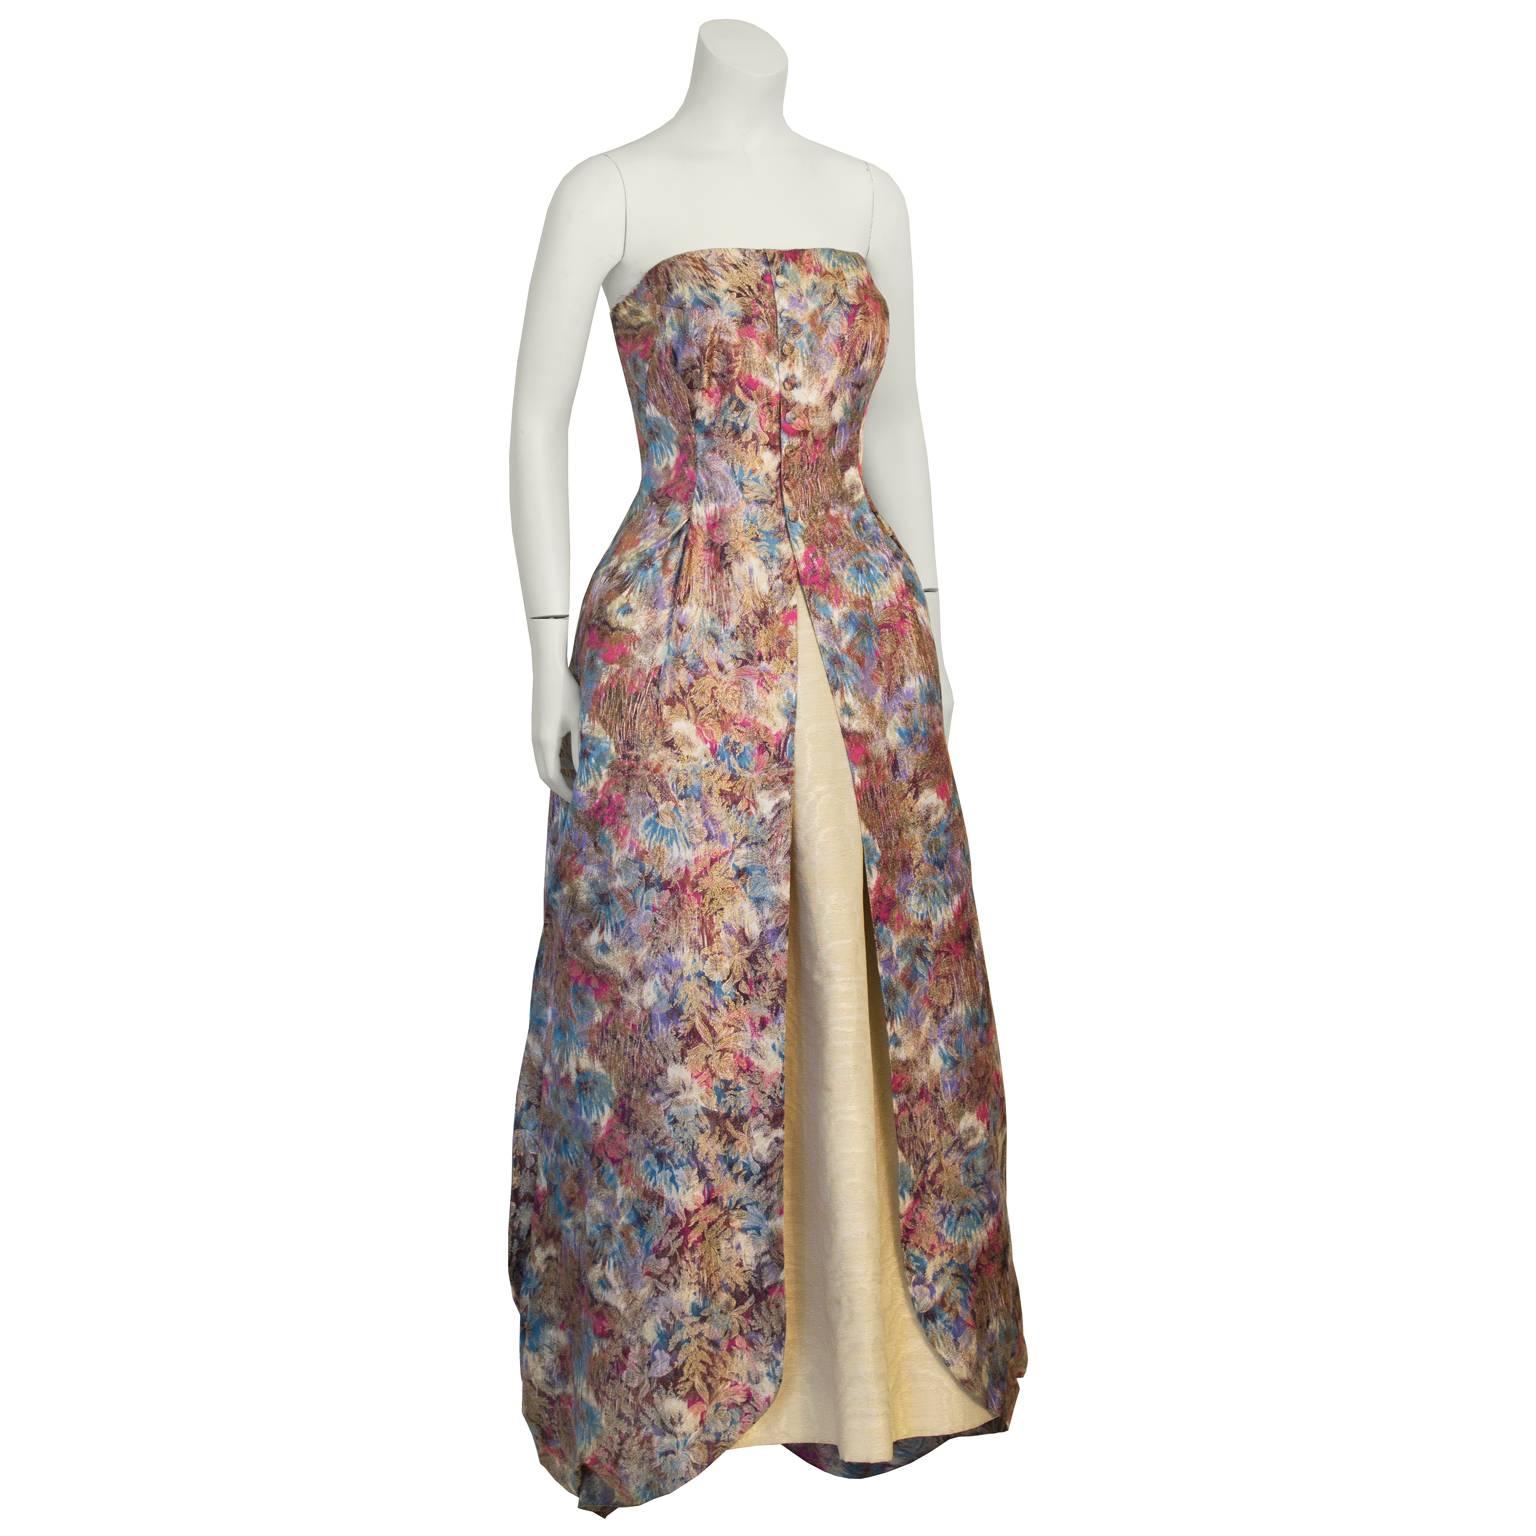 Gorgeous anonymous 1950's strapless brocade floral gown purchased in Paris comes in a stunning princess cut, with a split front opening and slightly balloon gathered over skirt,  with a cream silk underskirt. Floral brocade design in pink, orange,